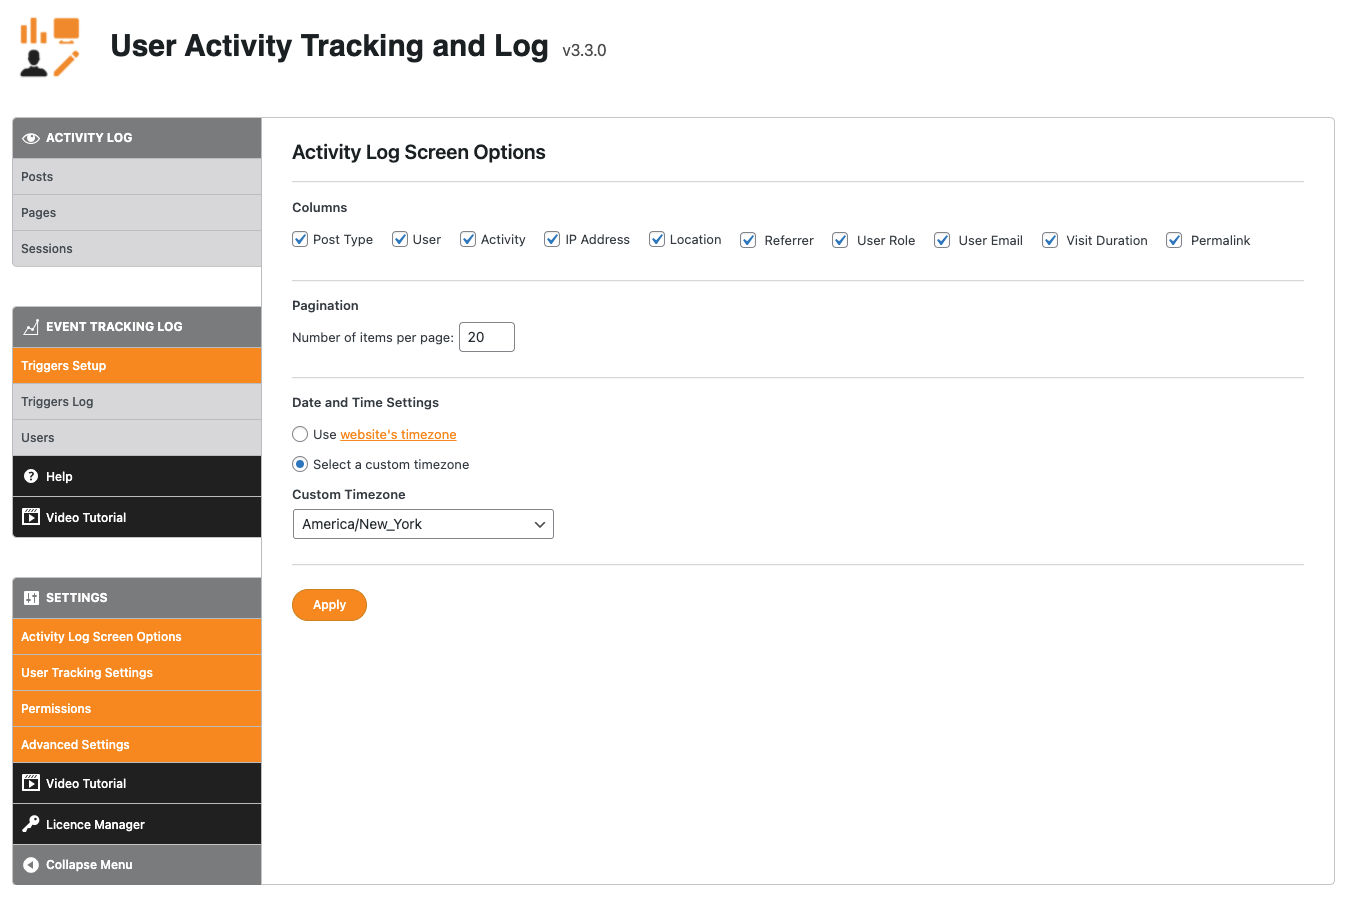 User Activity Tracking and Log - Activity Log - Post Type